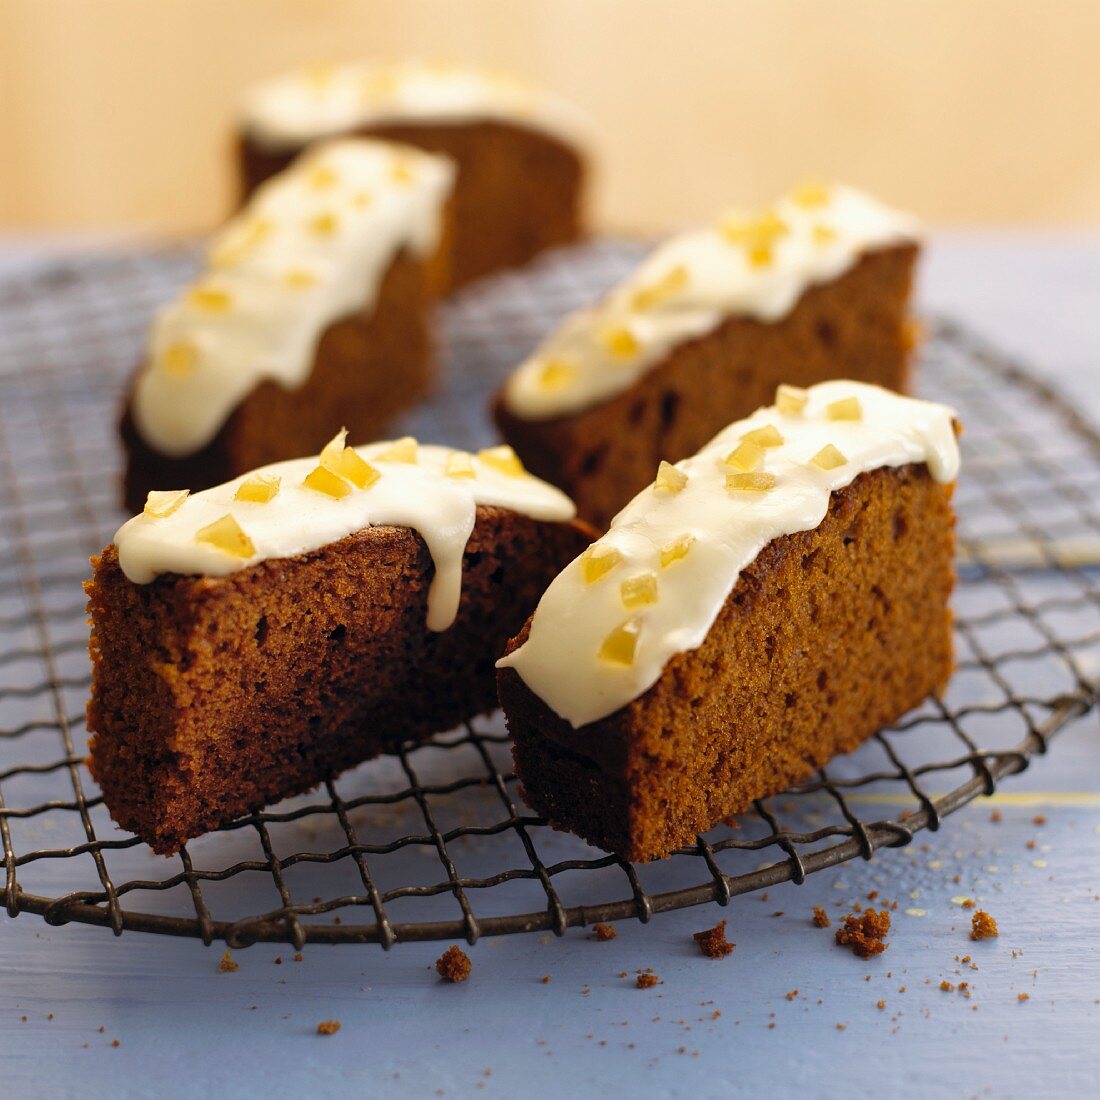 Orange gingerbread with icing